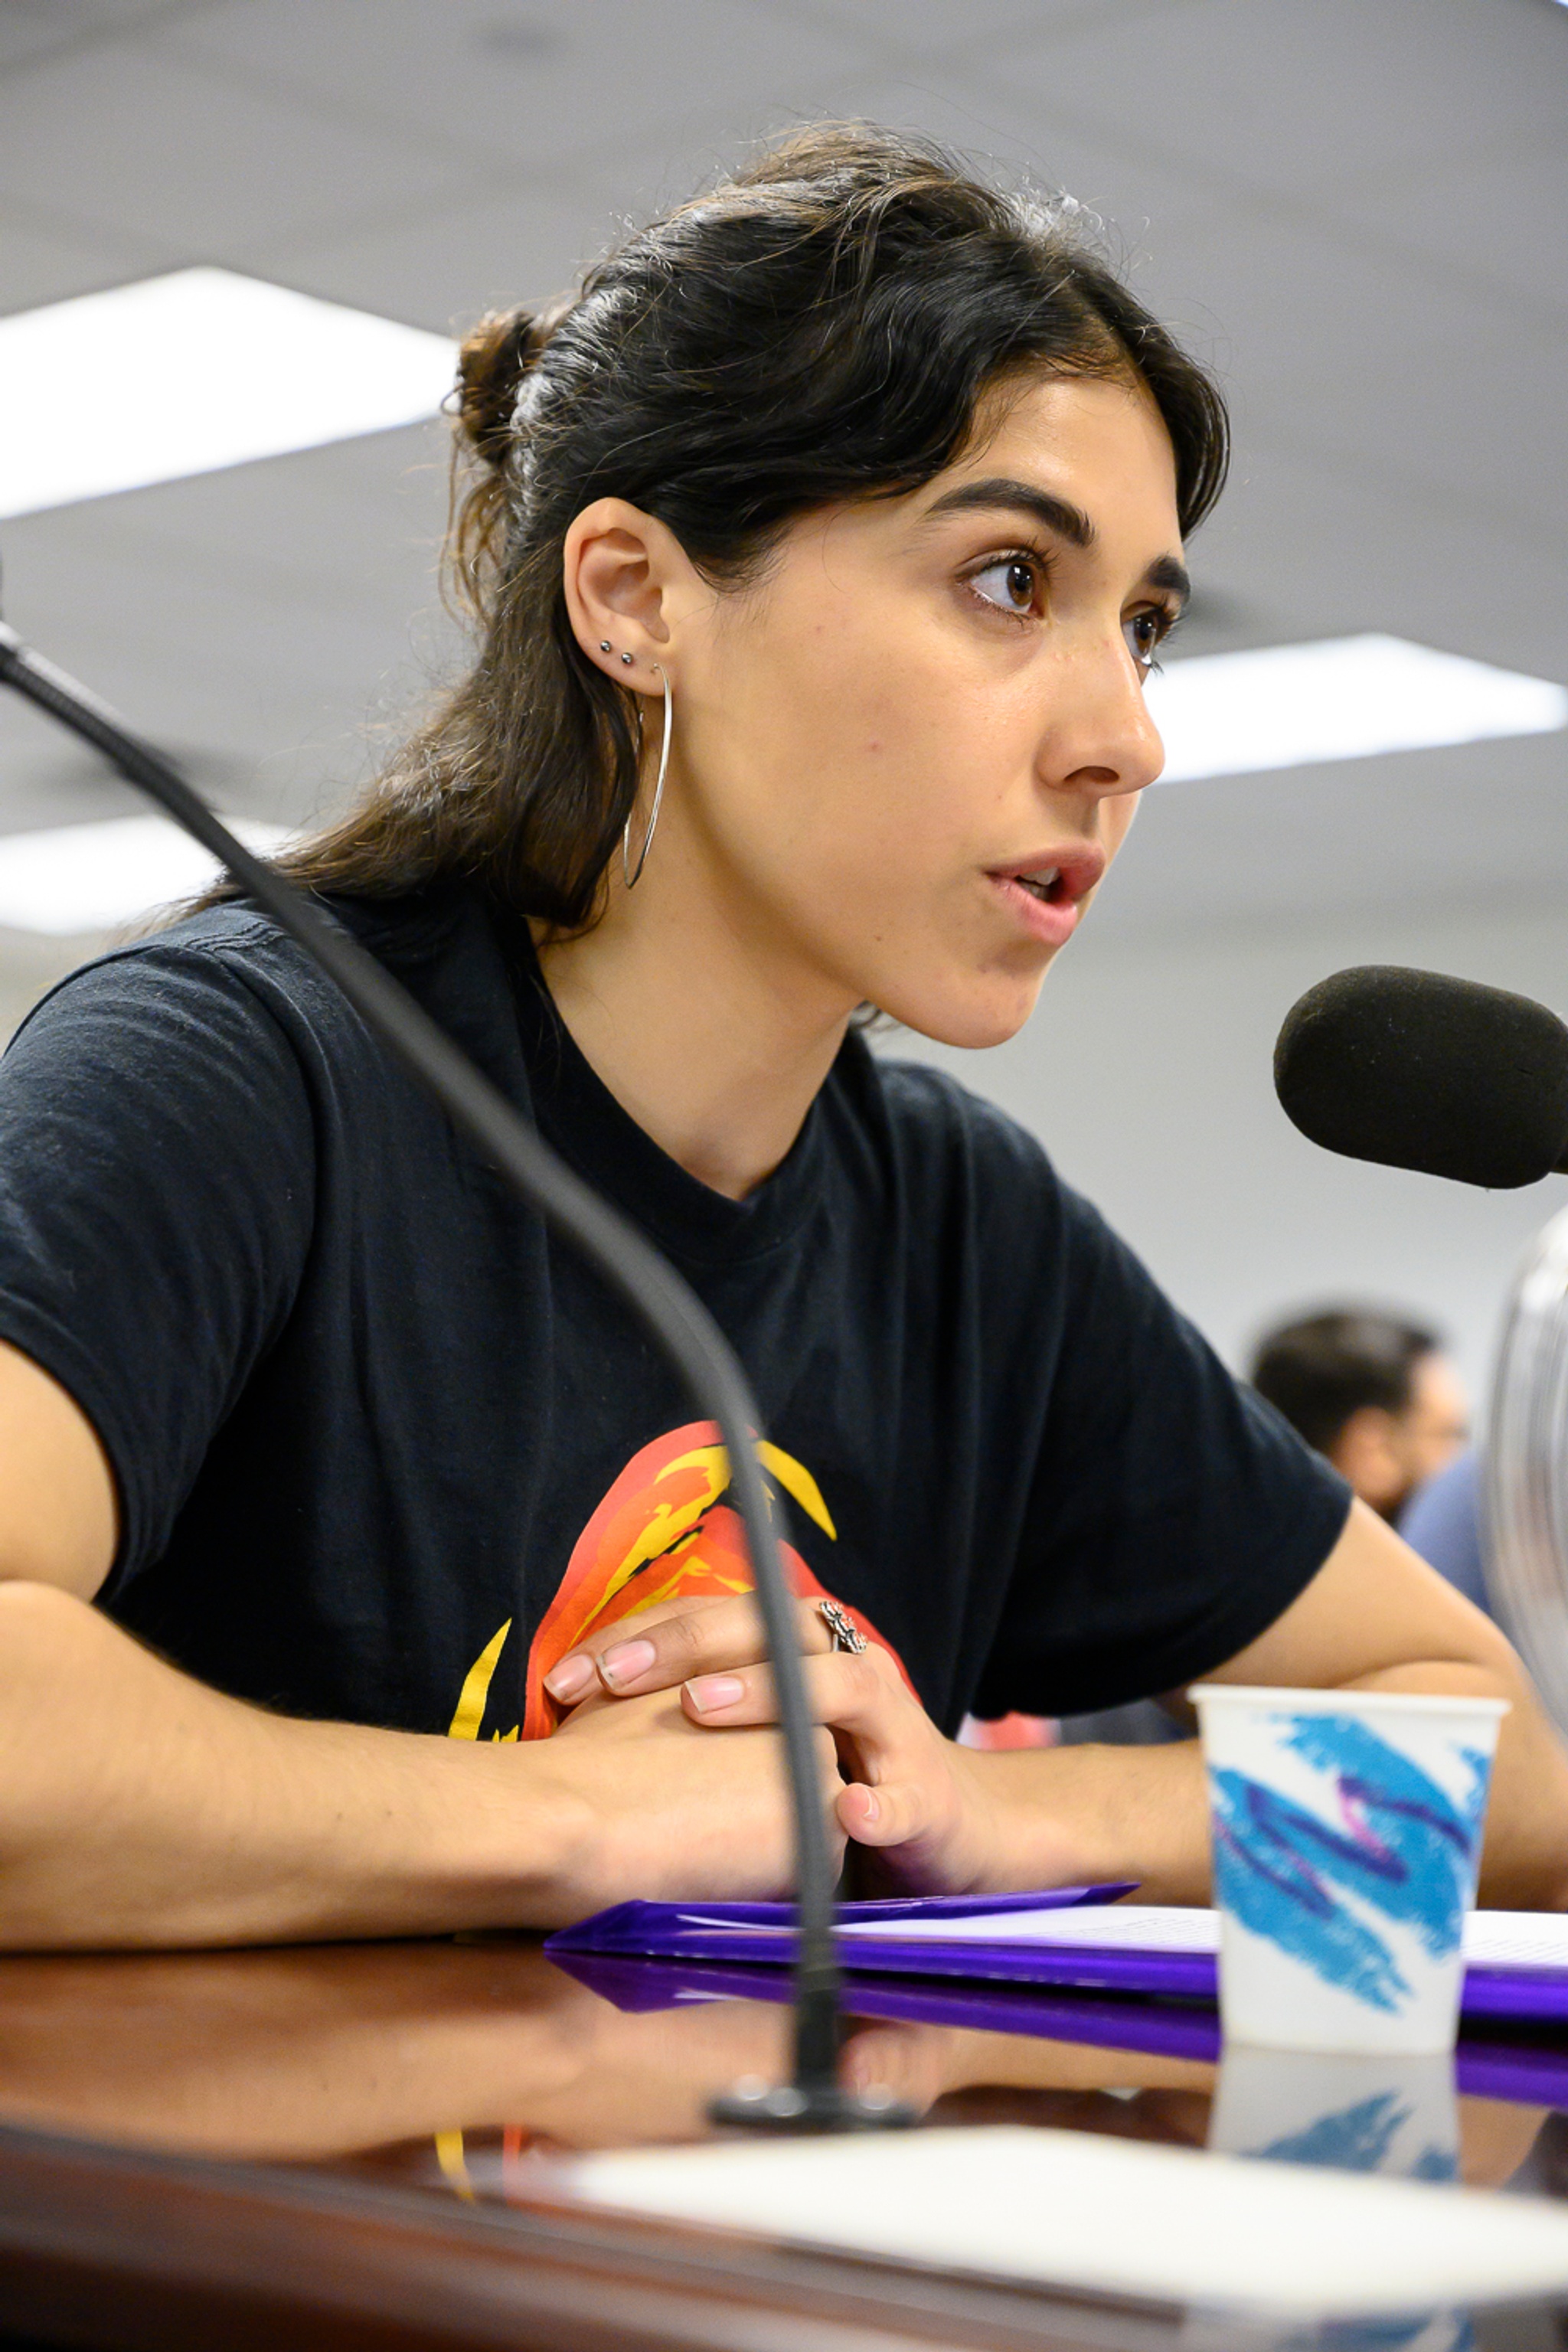 A photo of Leslie Velasquez speaking into a microphone at a table with her elbows on the table and hands crossed in front of her